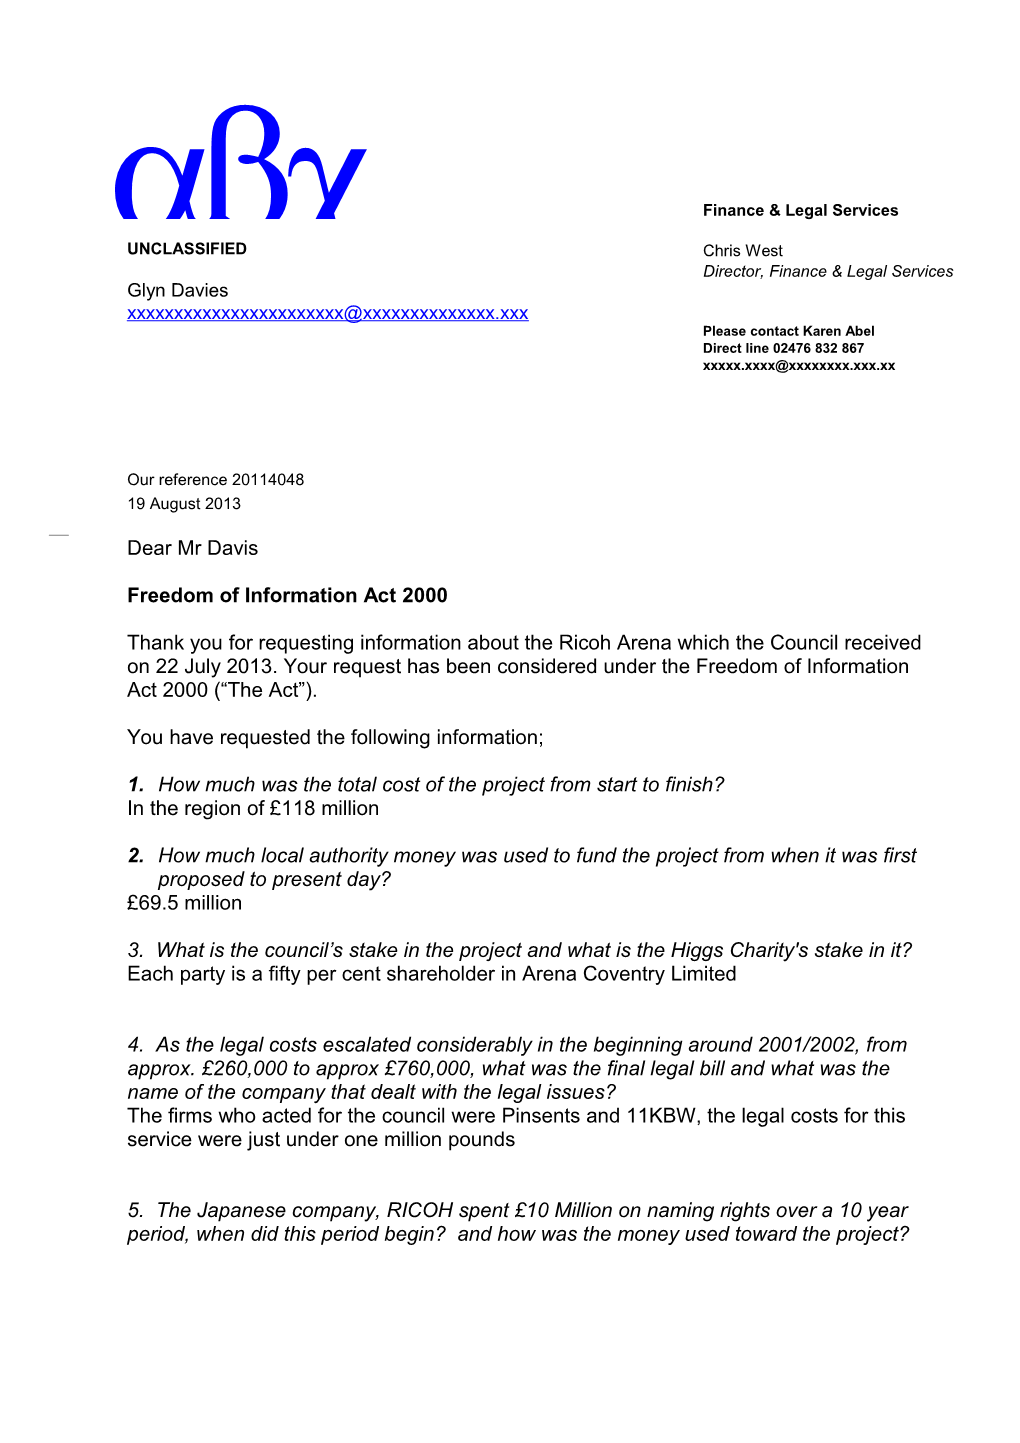 Covcc Letter To: Glyn Davies